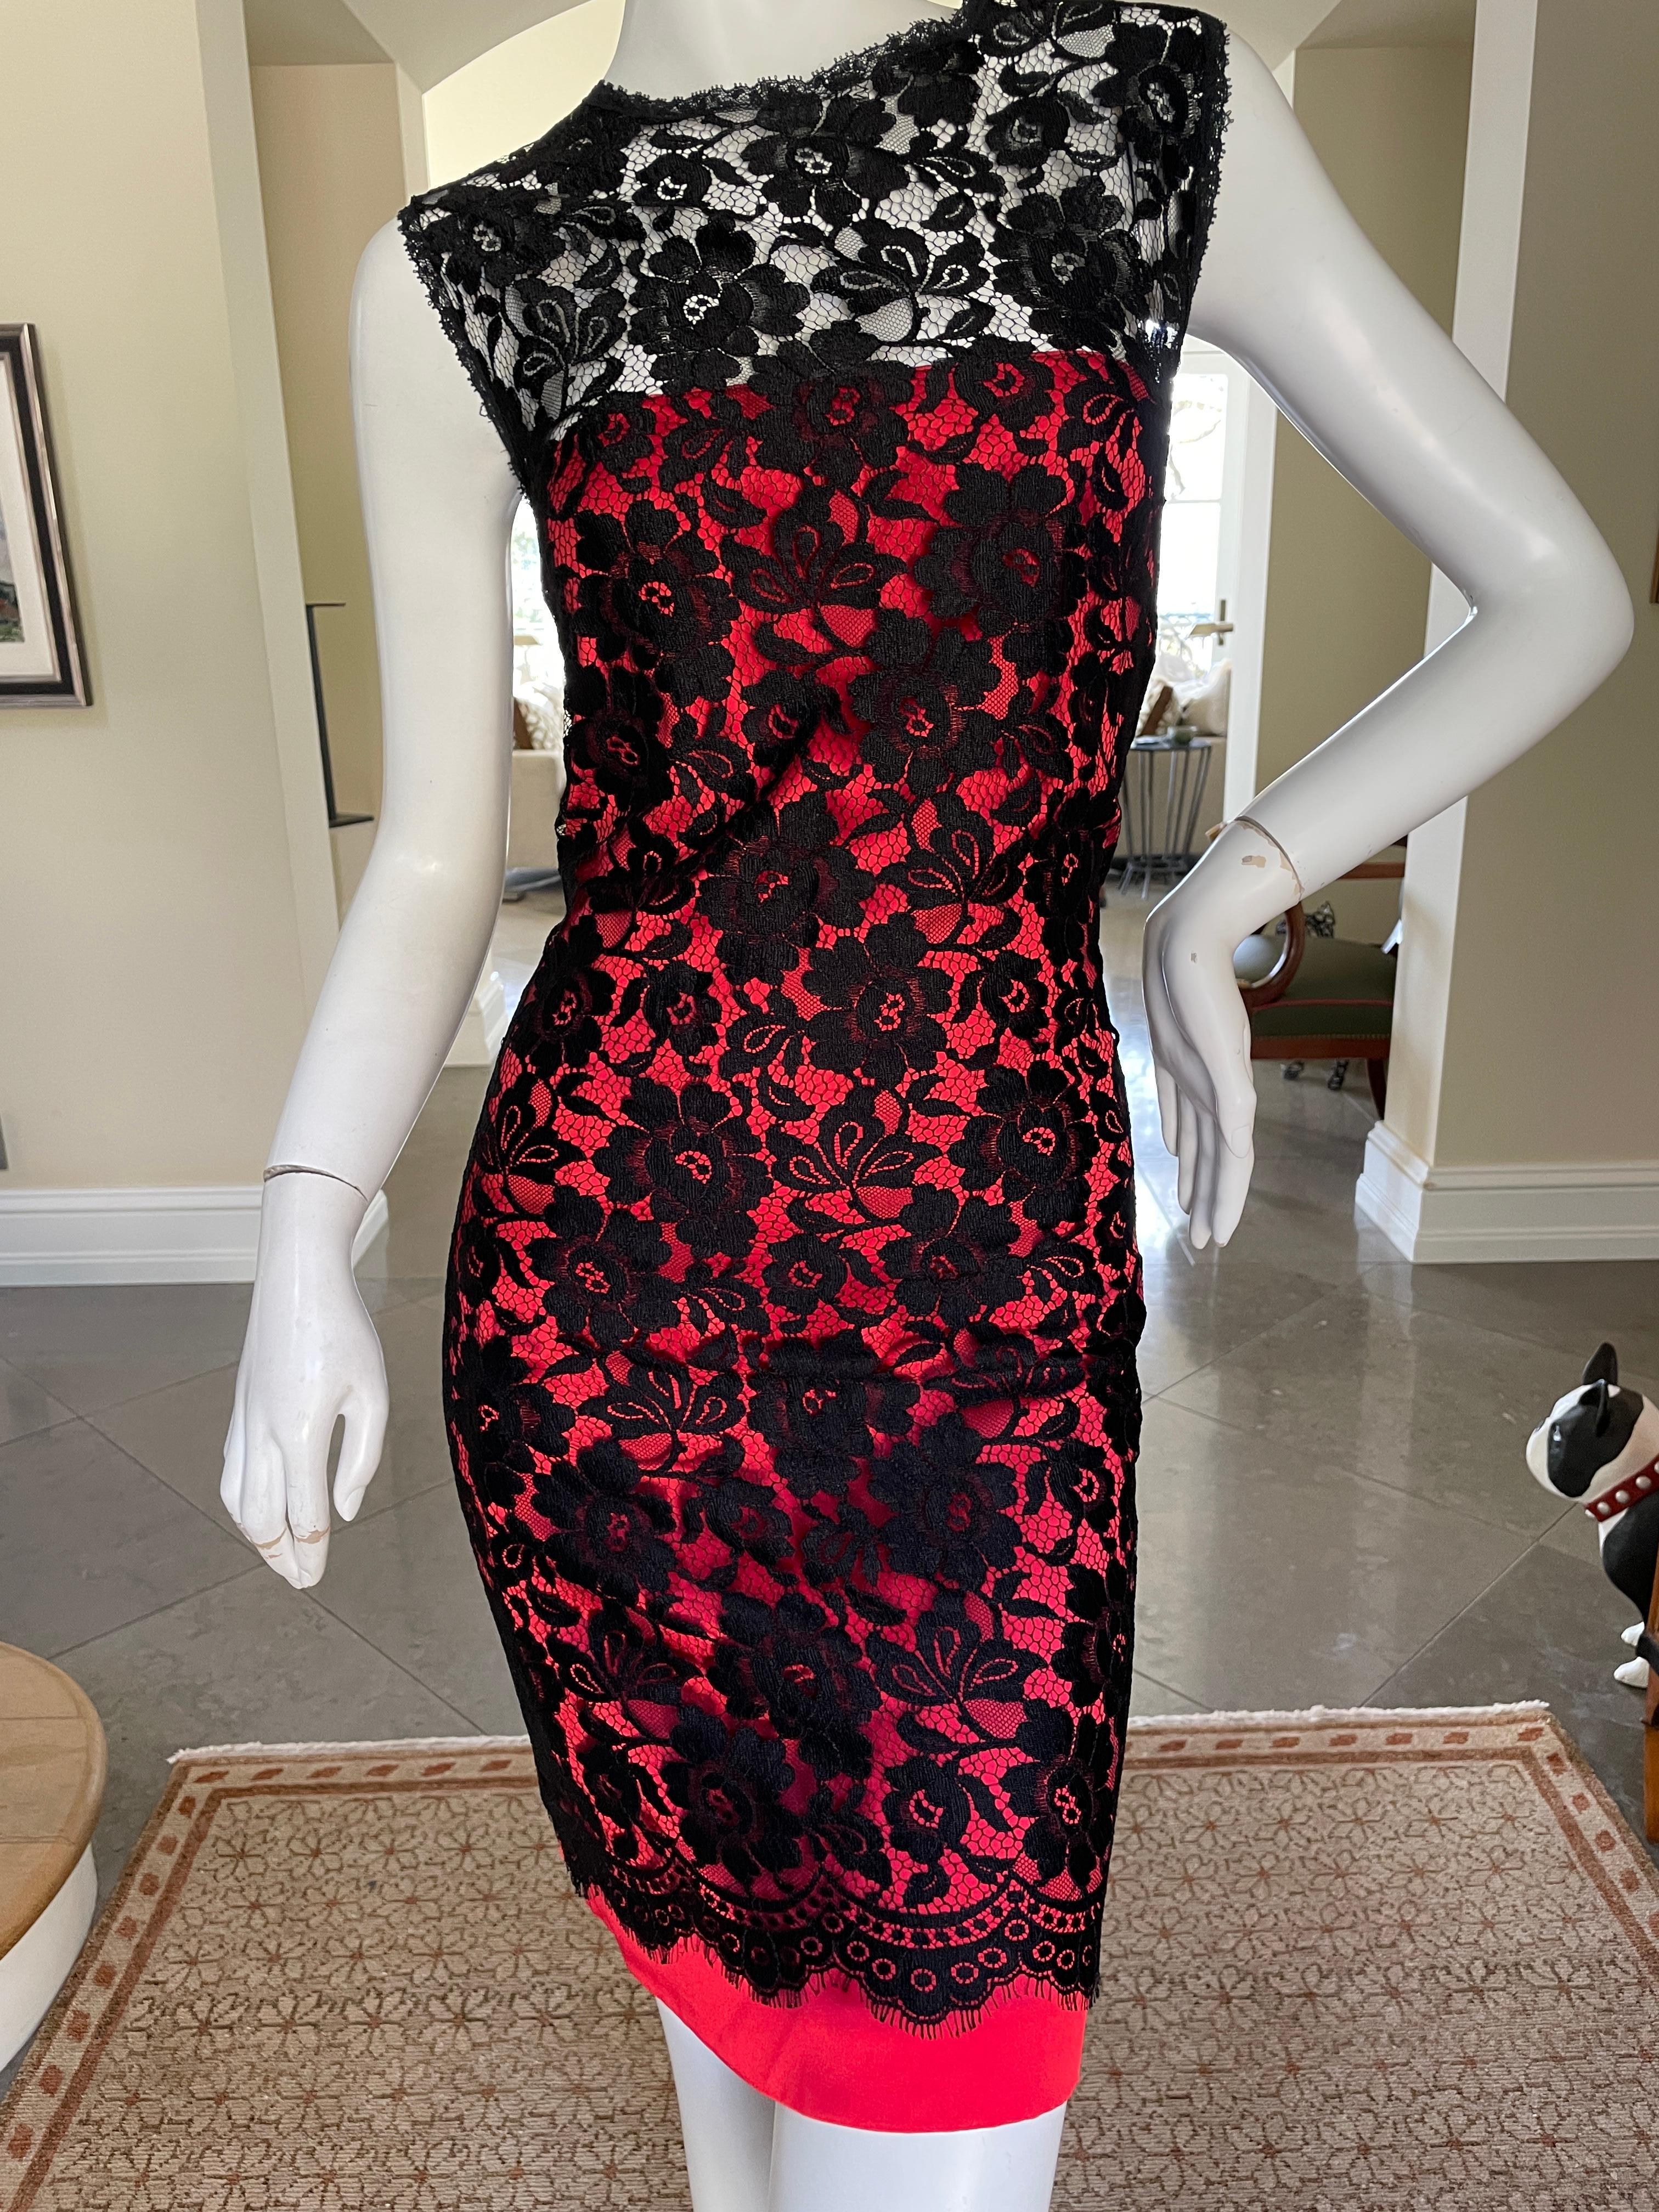 red dress with black mesh overlay